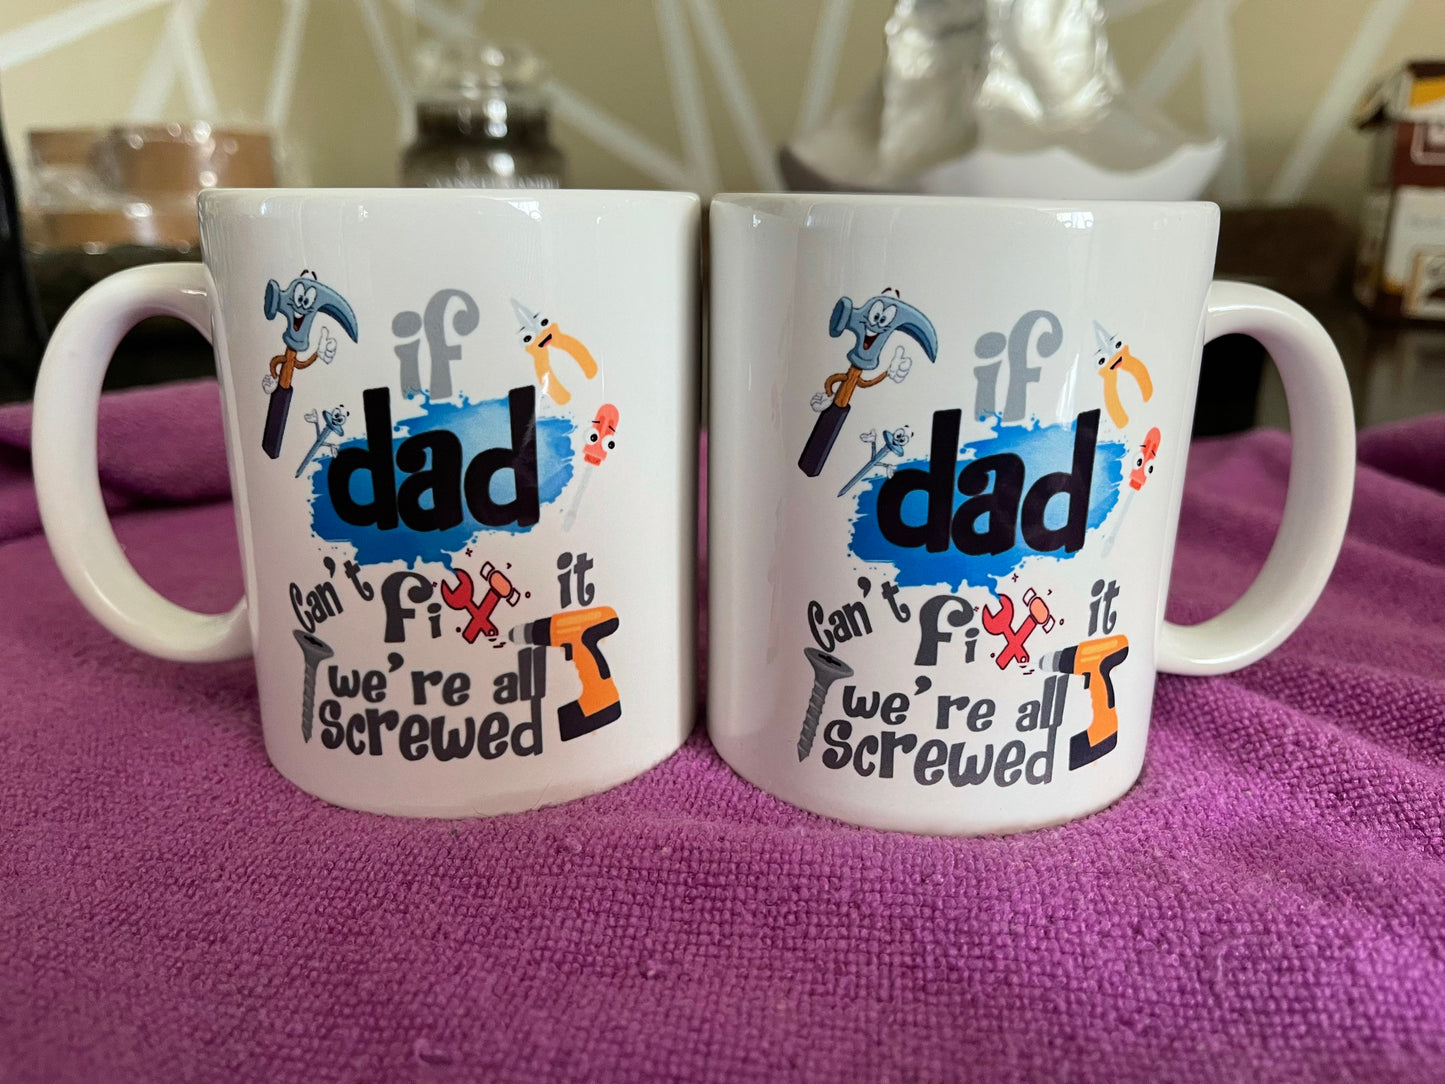 Novelty mug (if dad can’t fix it no one can)